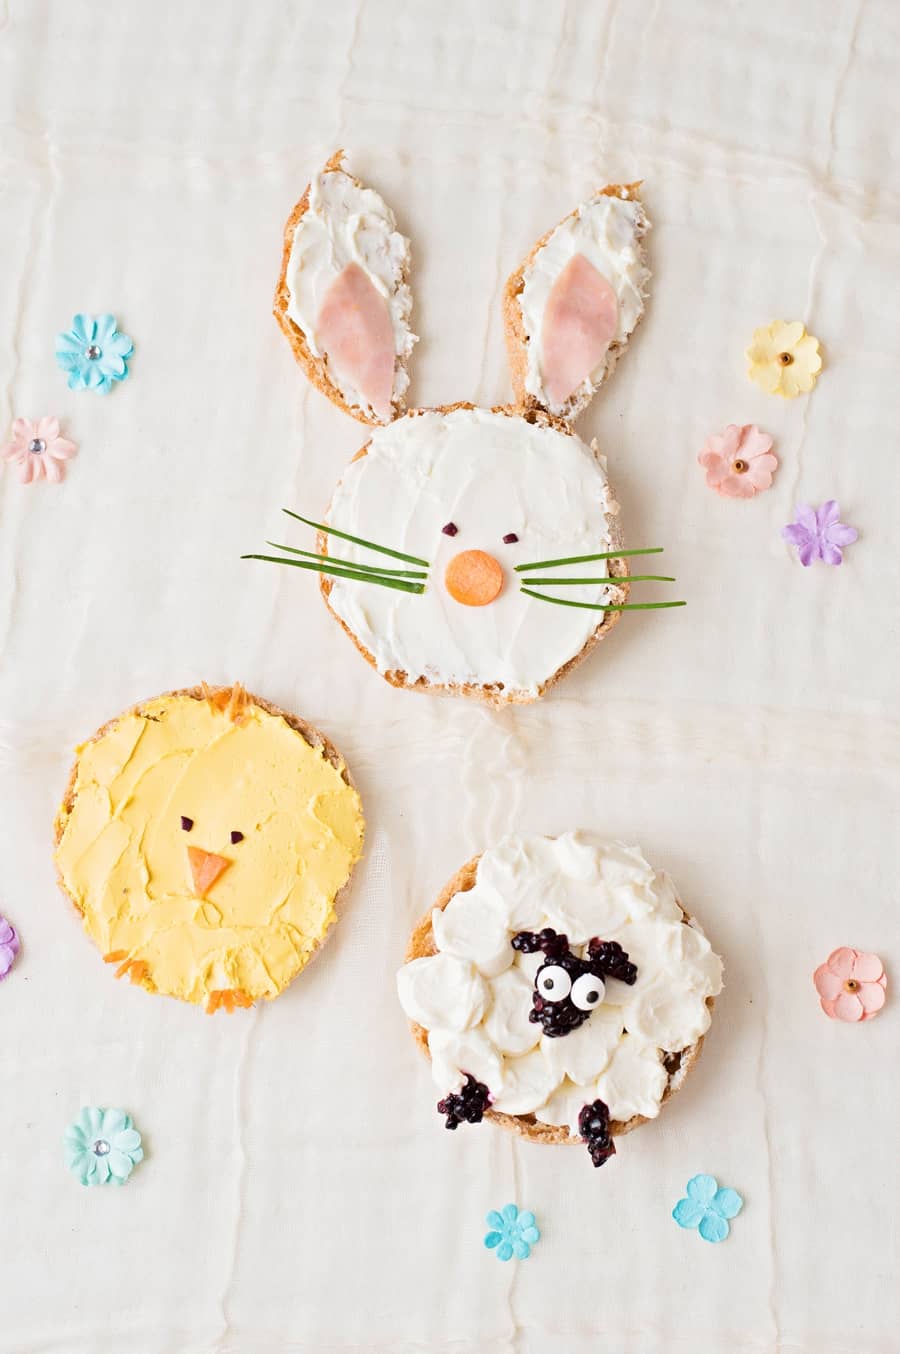 Celebrate spring by making your kids this adorable animal-themed lunch or breakfast of bunny chick and sheep Easter Toast!